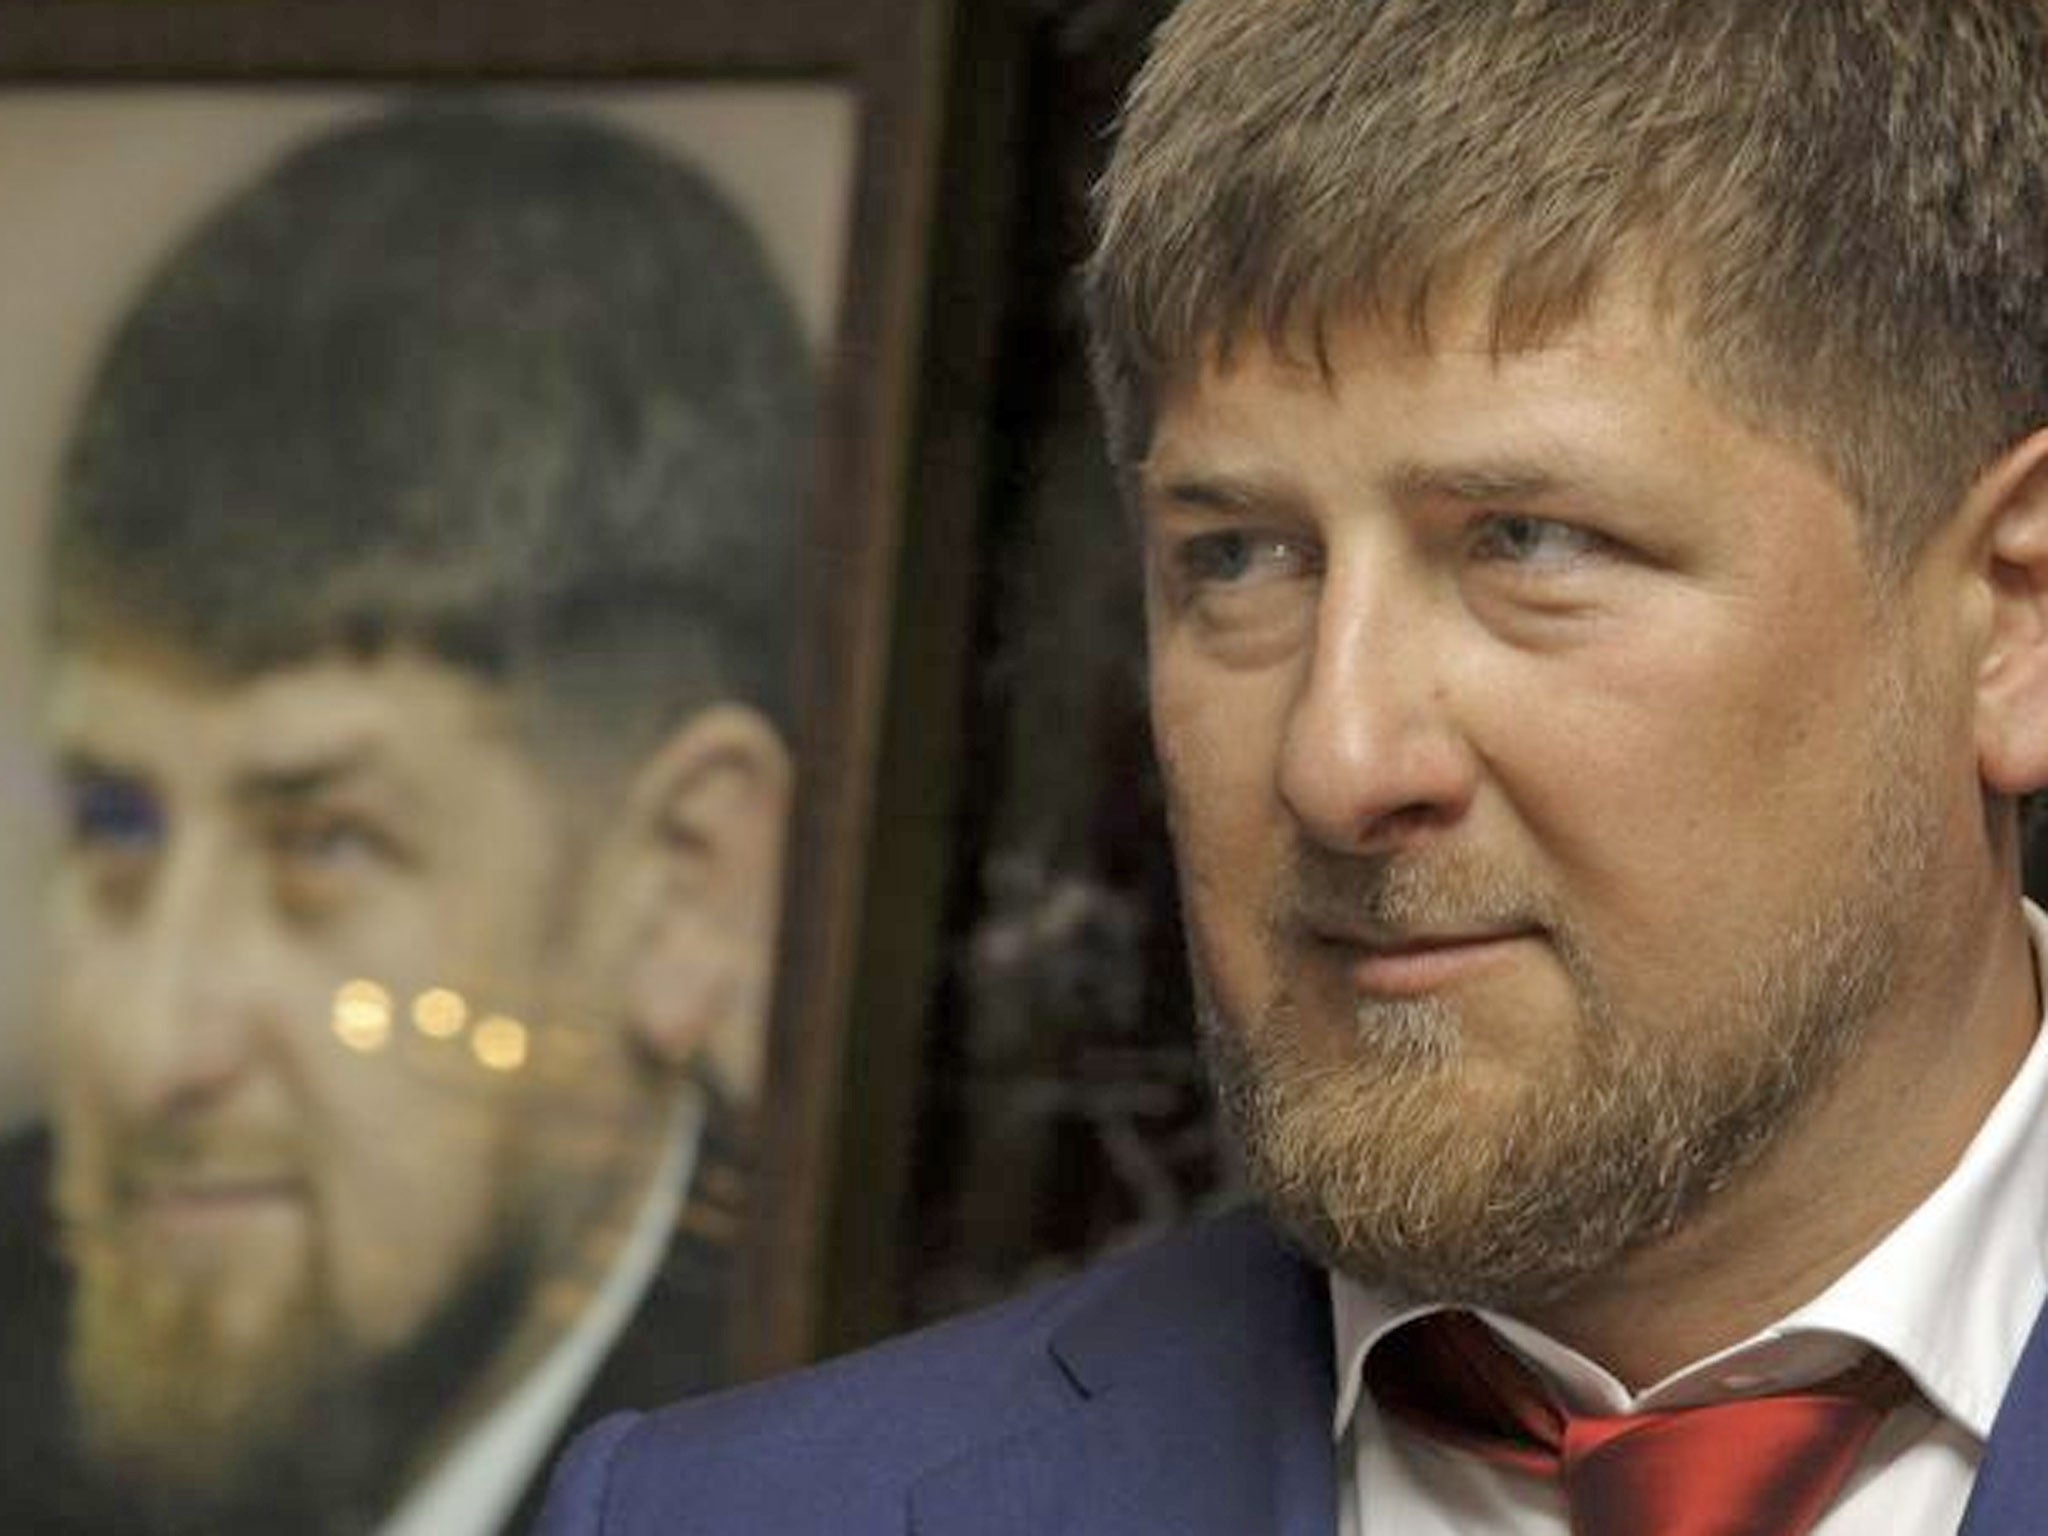 Chechnya’s leader, Ramzan Kadyrov, says he has identified the people who posted mocking videos on YouTube